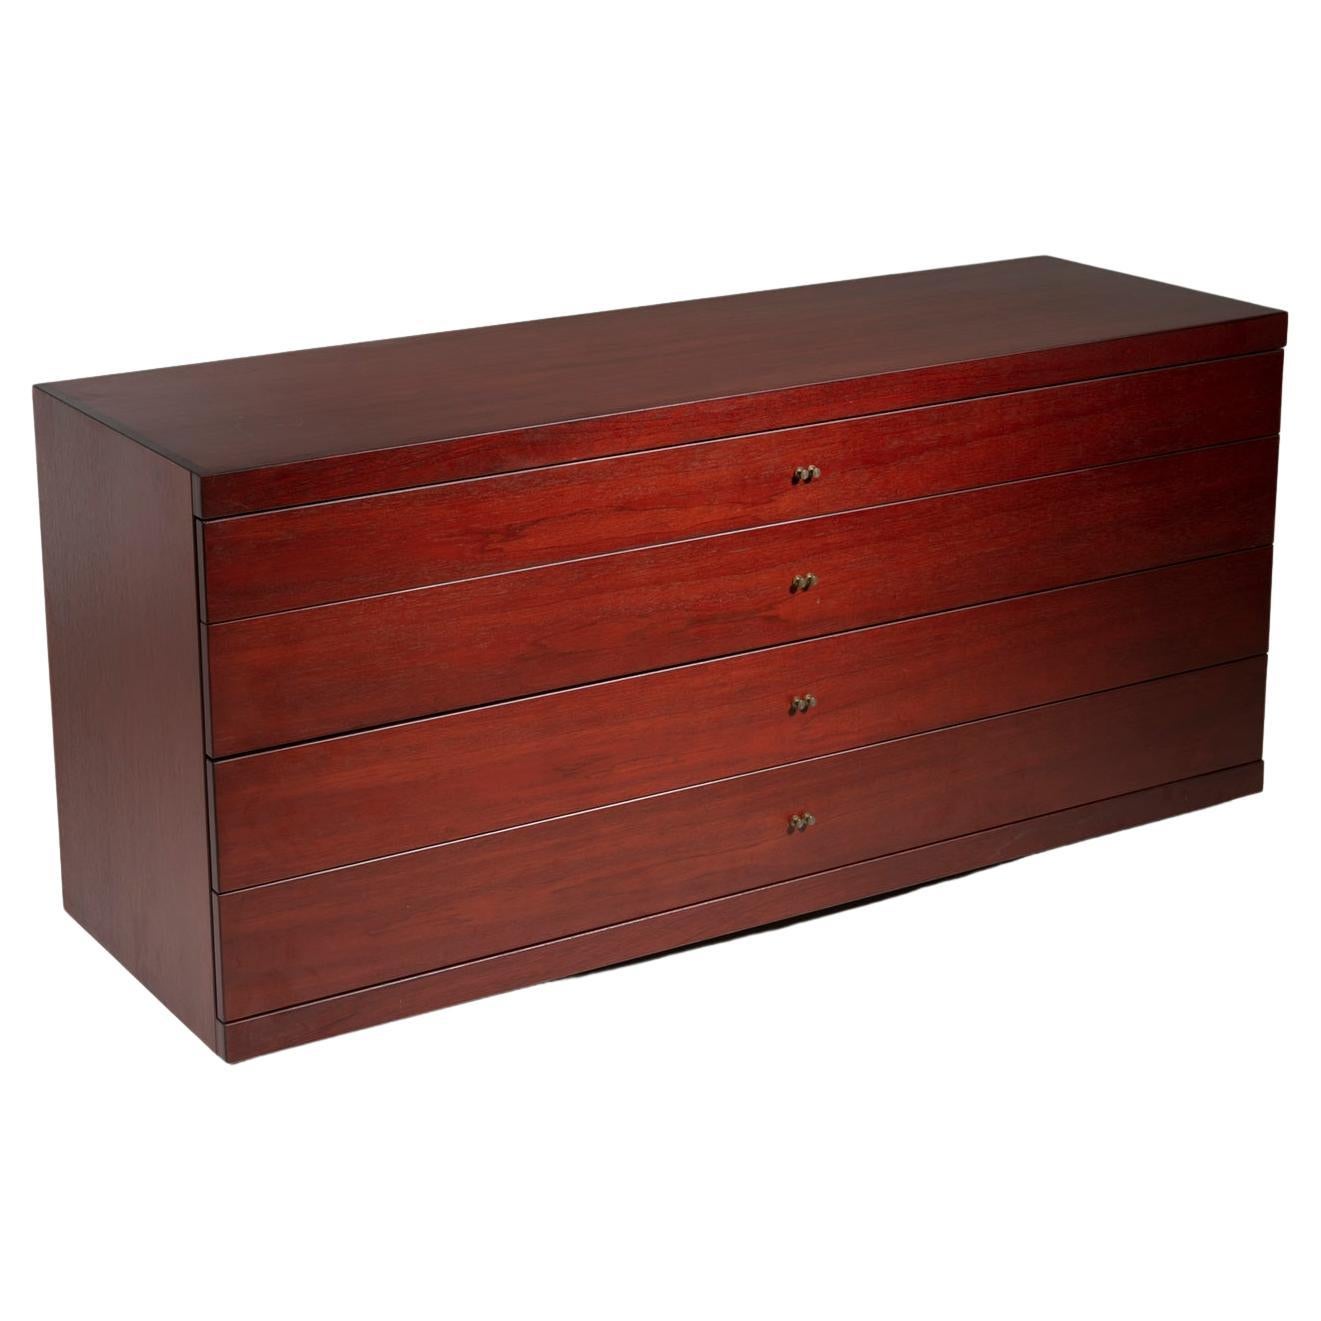 Capable MB84 Wood Chest of Drawers by Roberto Poggi for Poggi, Italy, 1990s For Sale